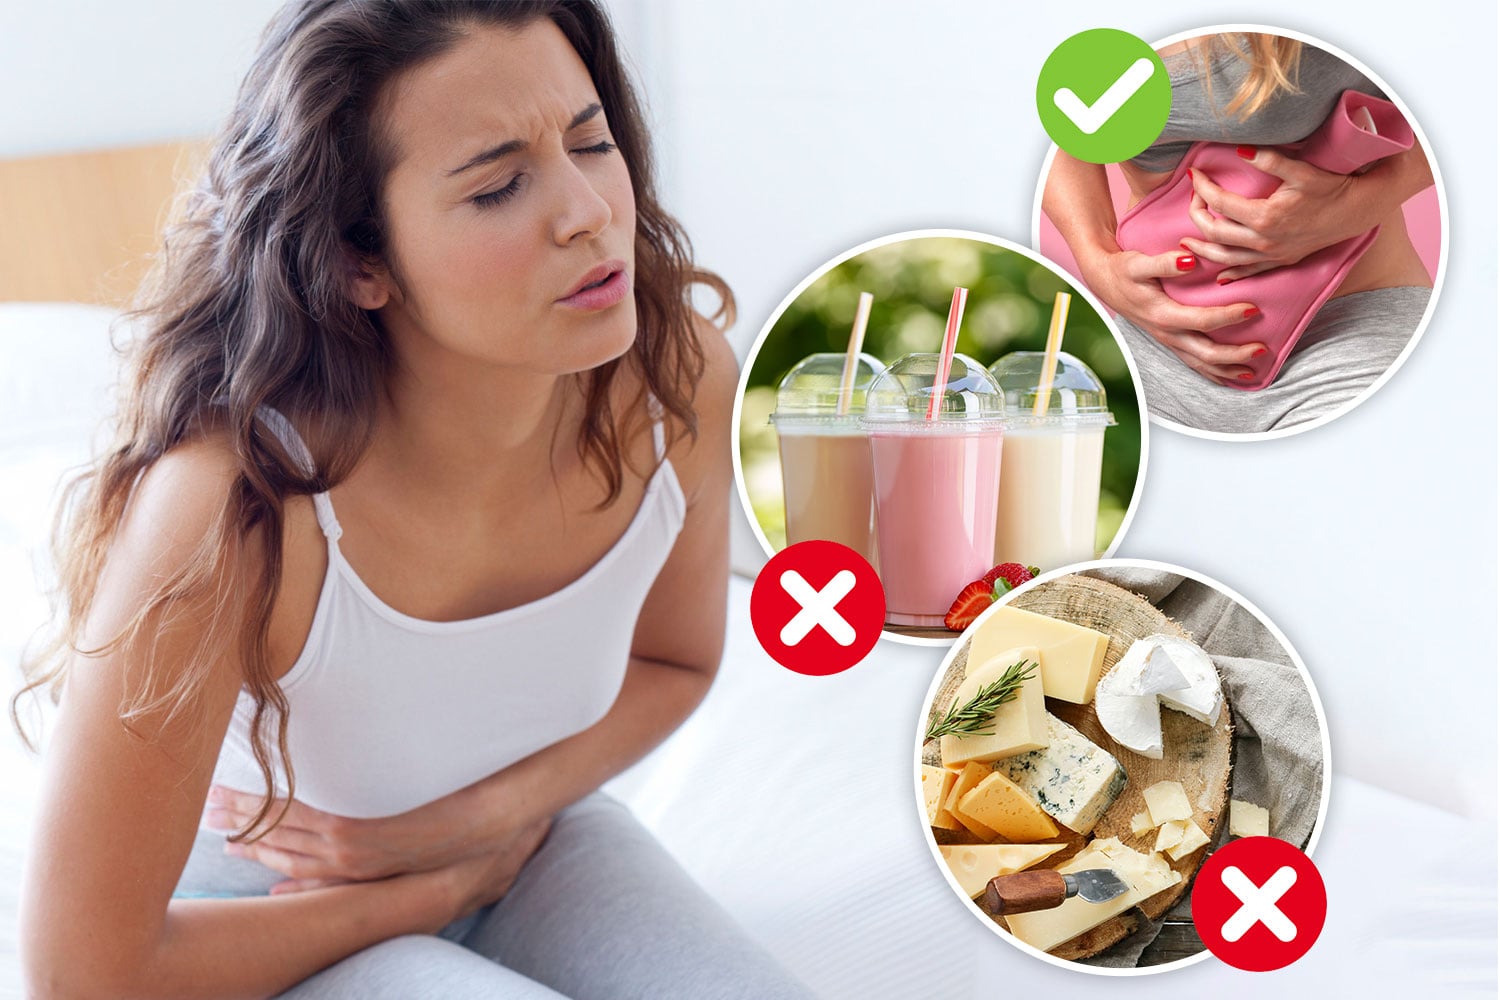 I'm a gut microbiologist - here's 10 easy ways to ease IBS symptoms fast